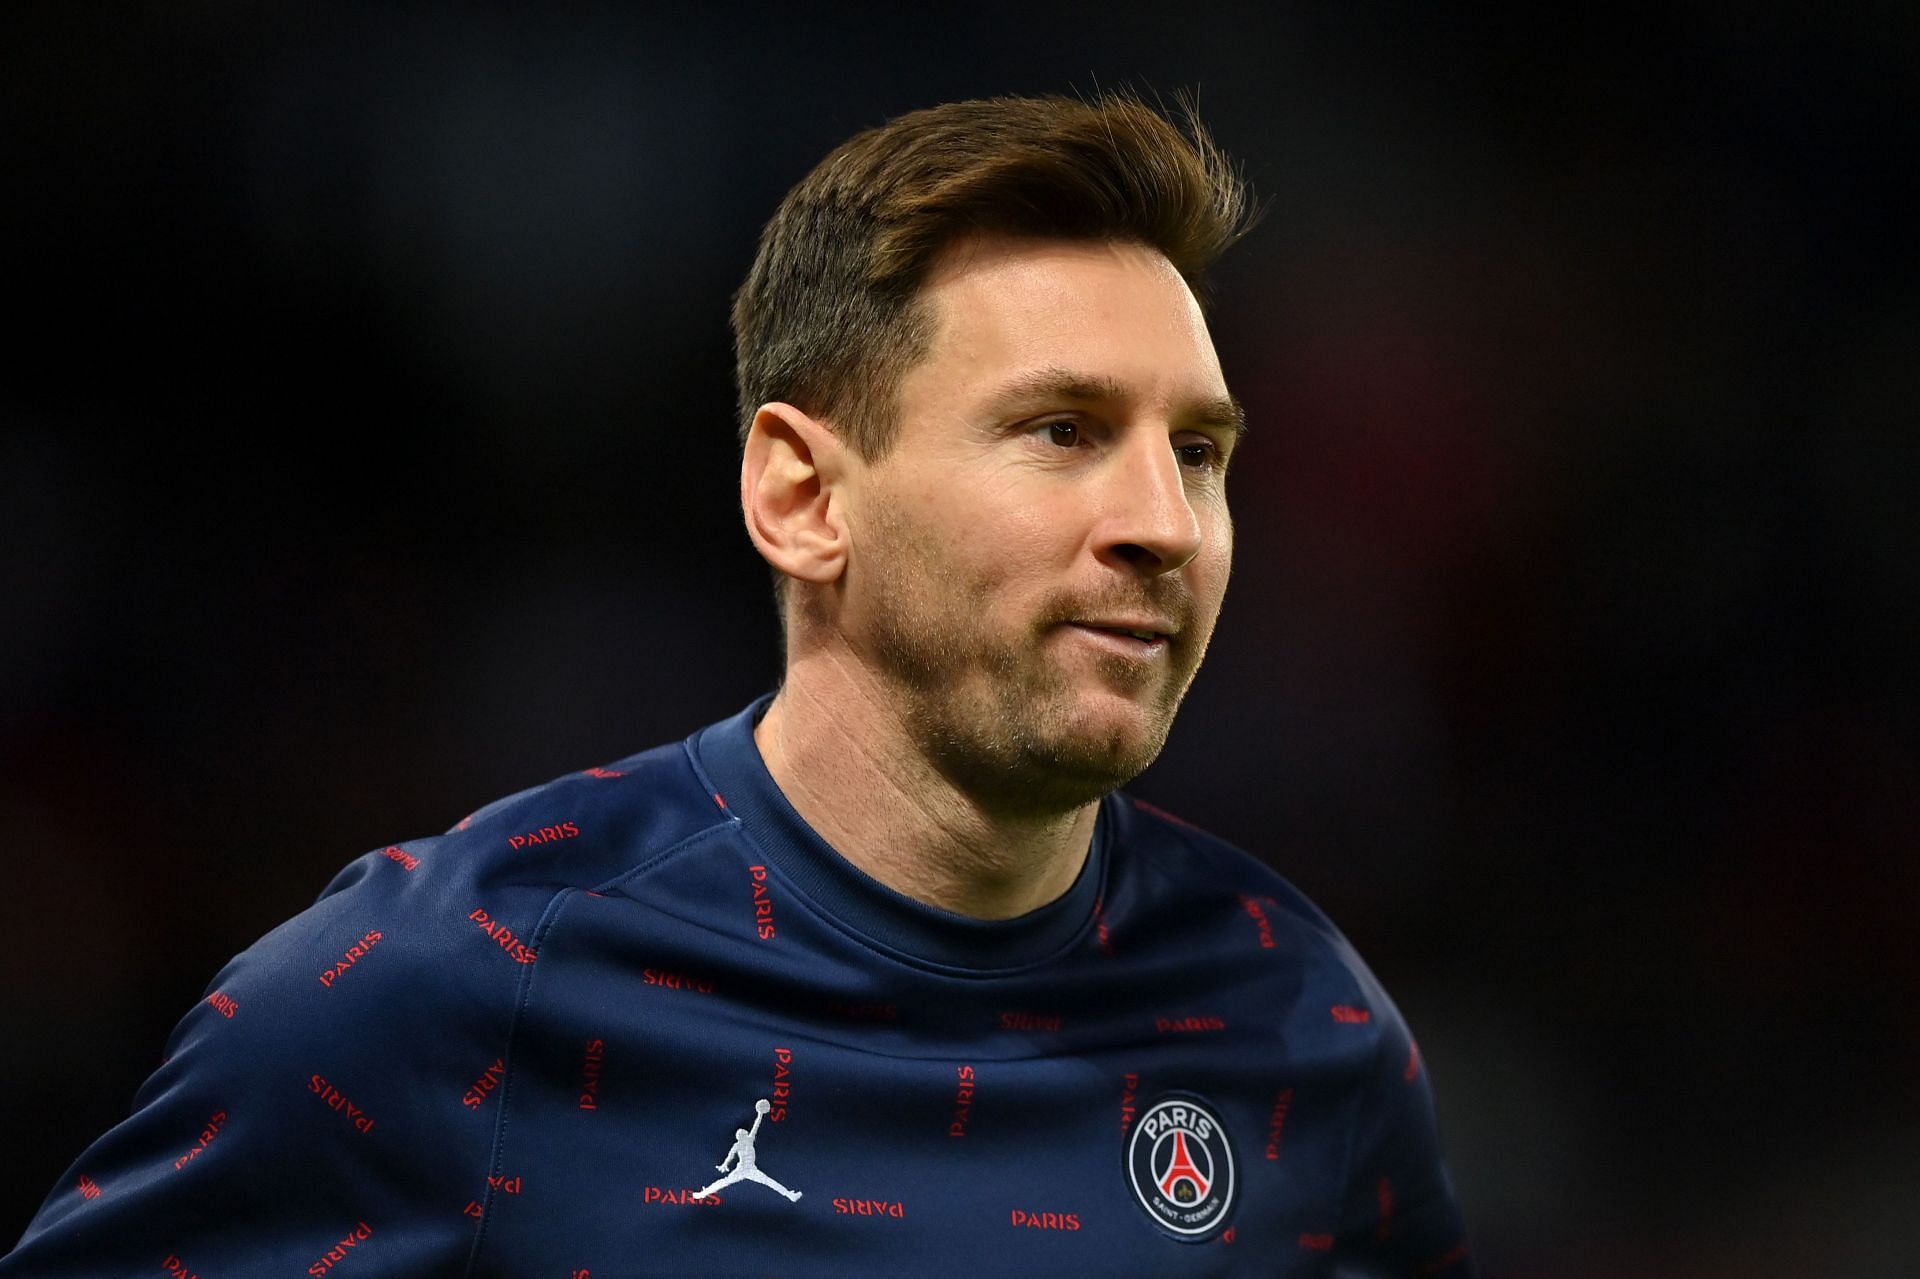 Lionel Messi has revealed he joined PSG to win the Champions League.